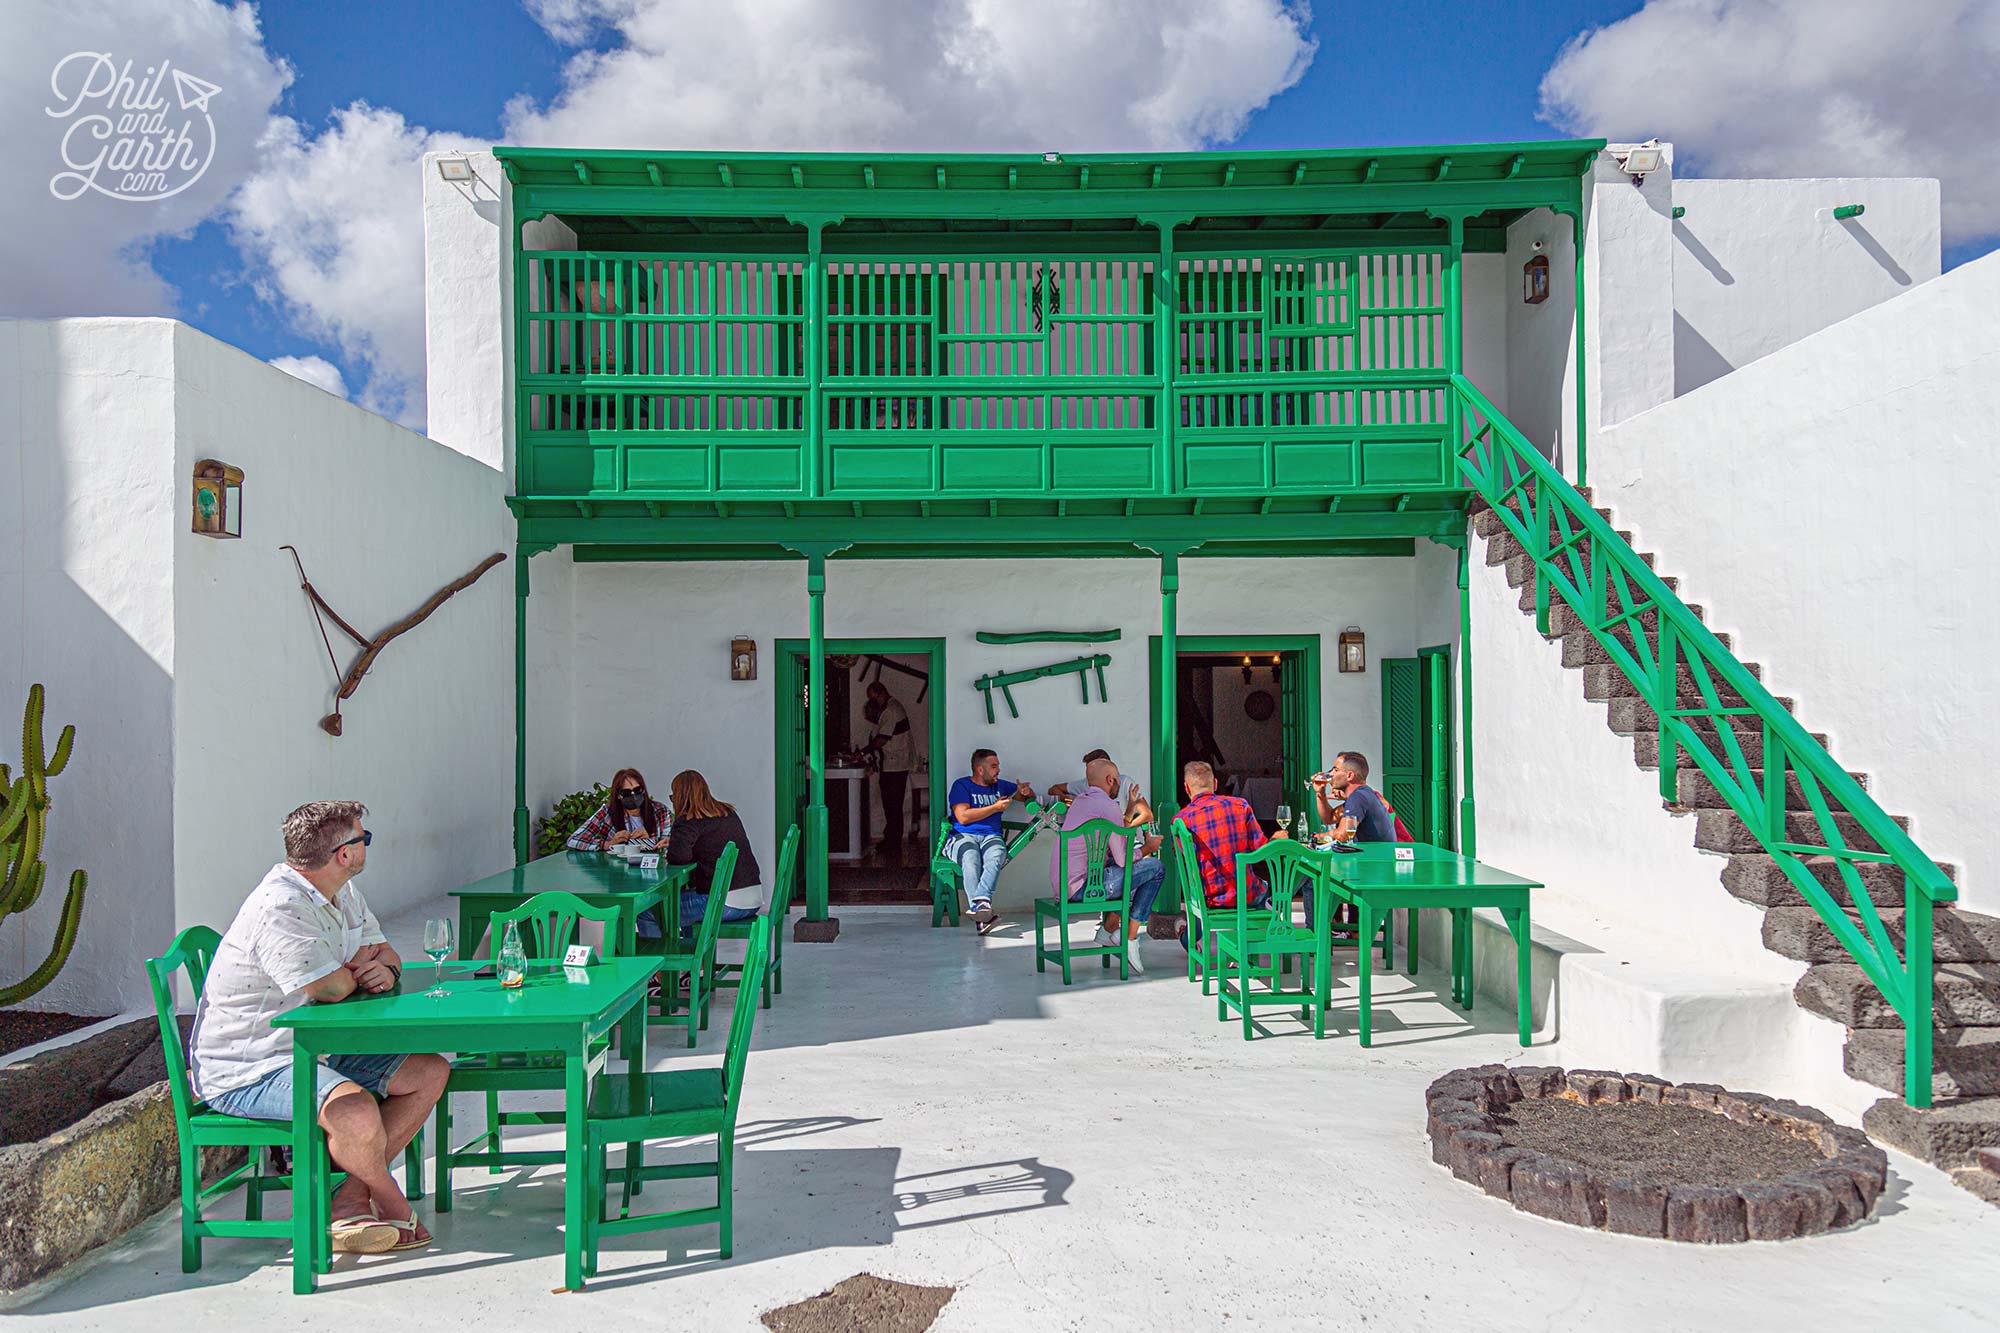 The bar painted in buildings painted in a traditional Lanzarote farmer's style of white and green